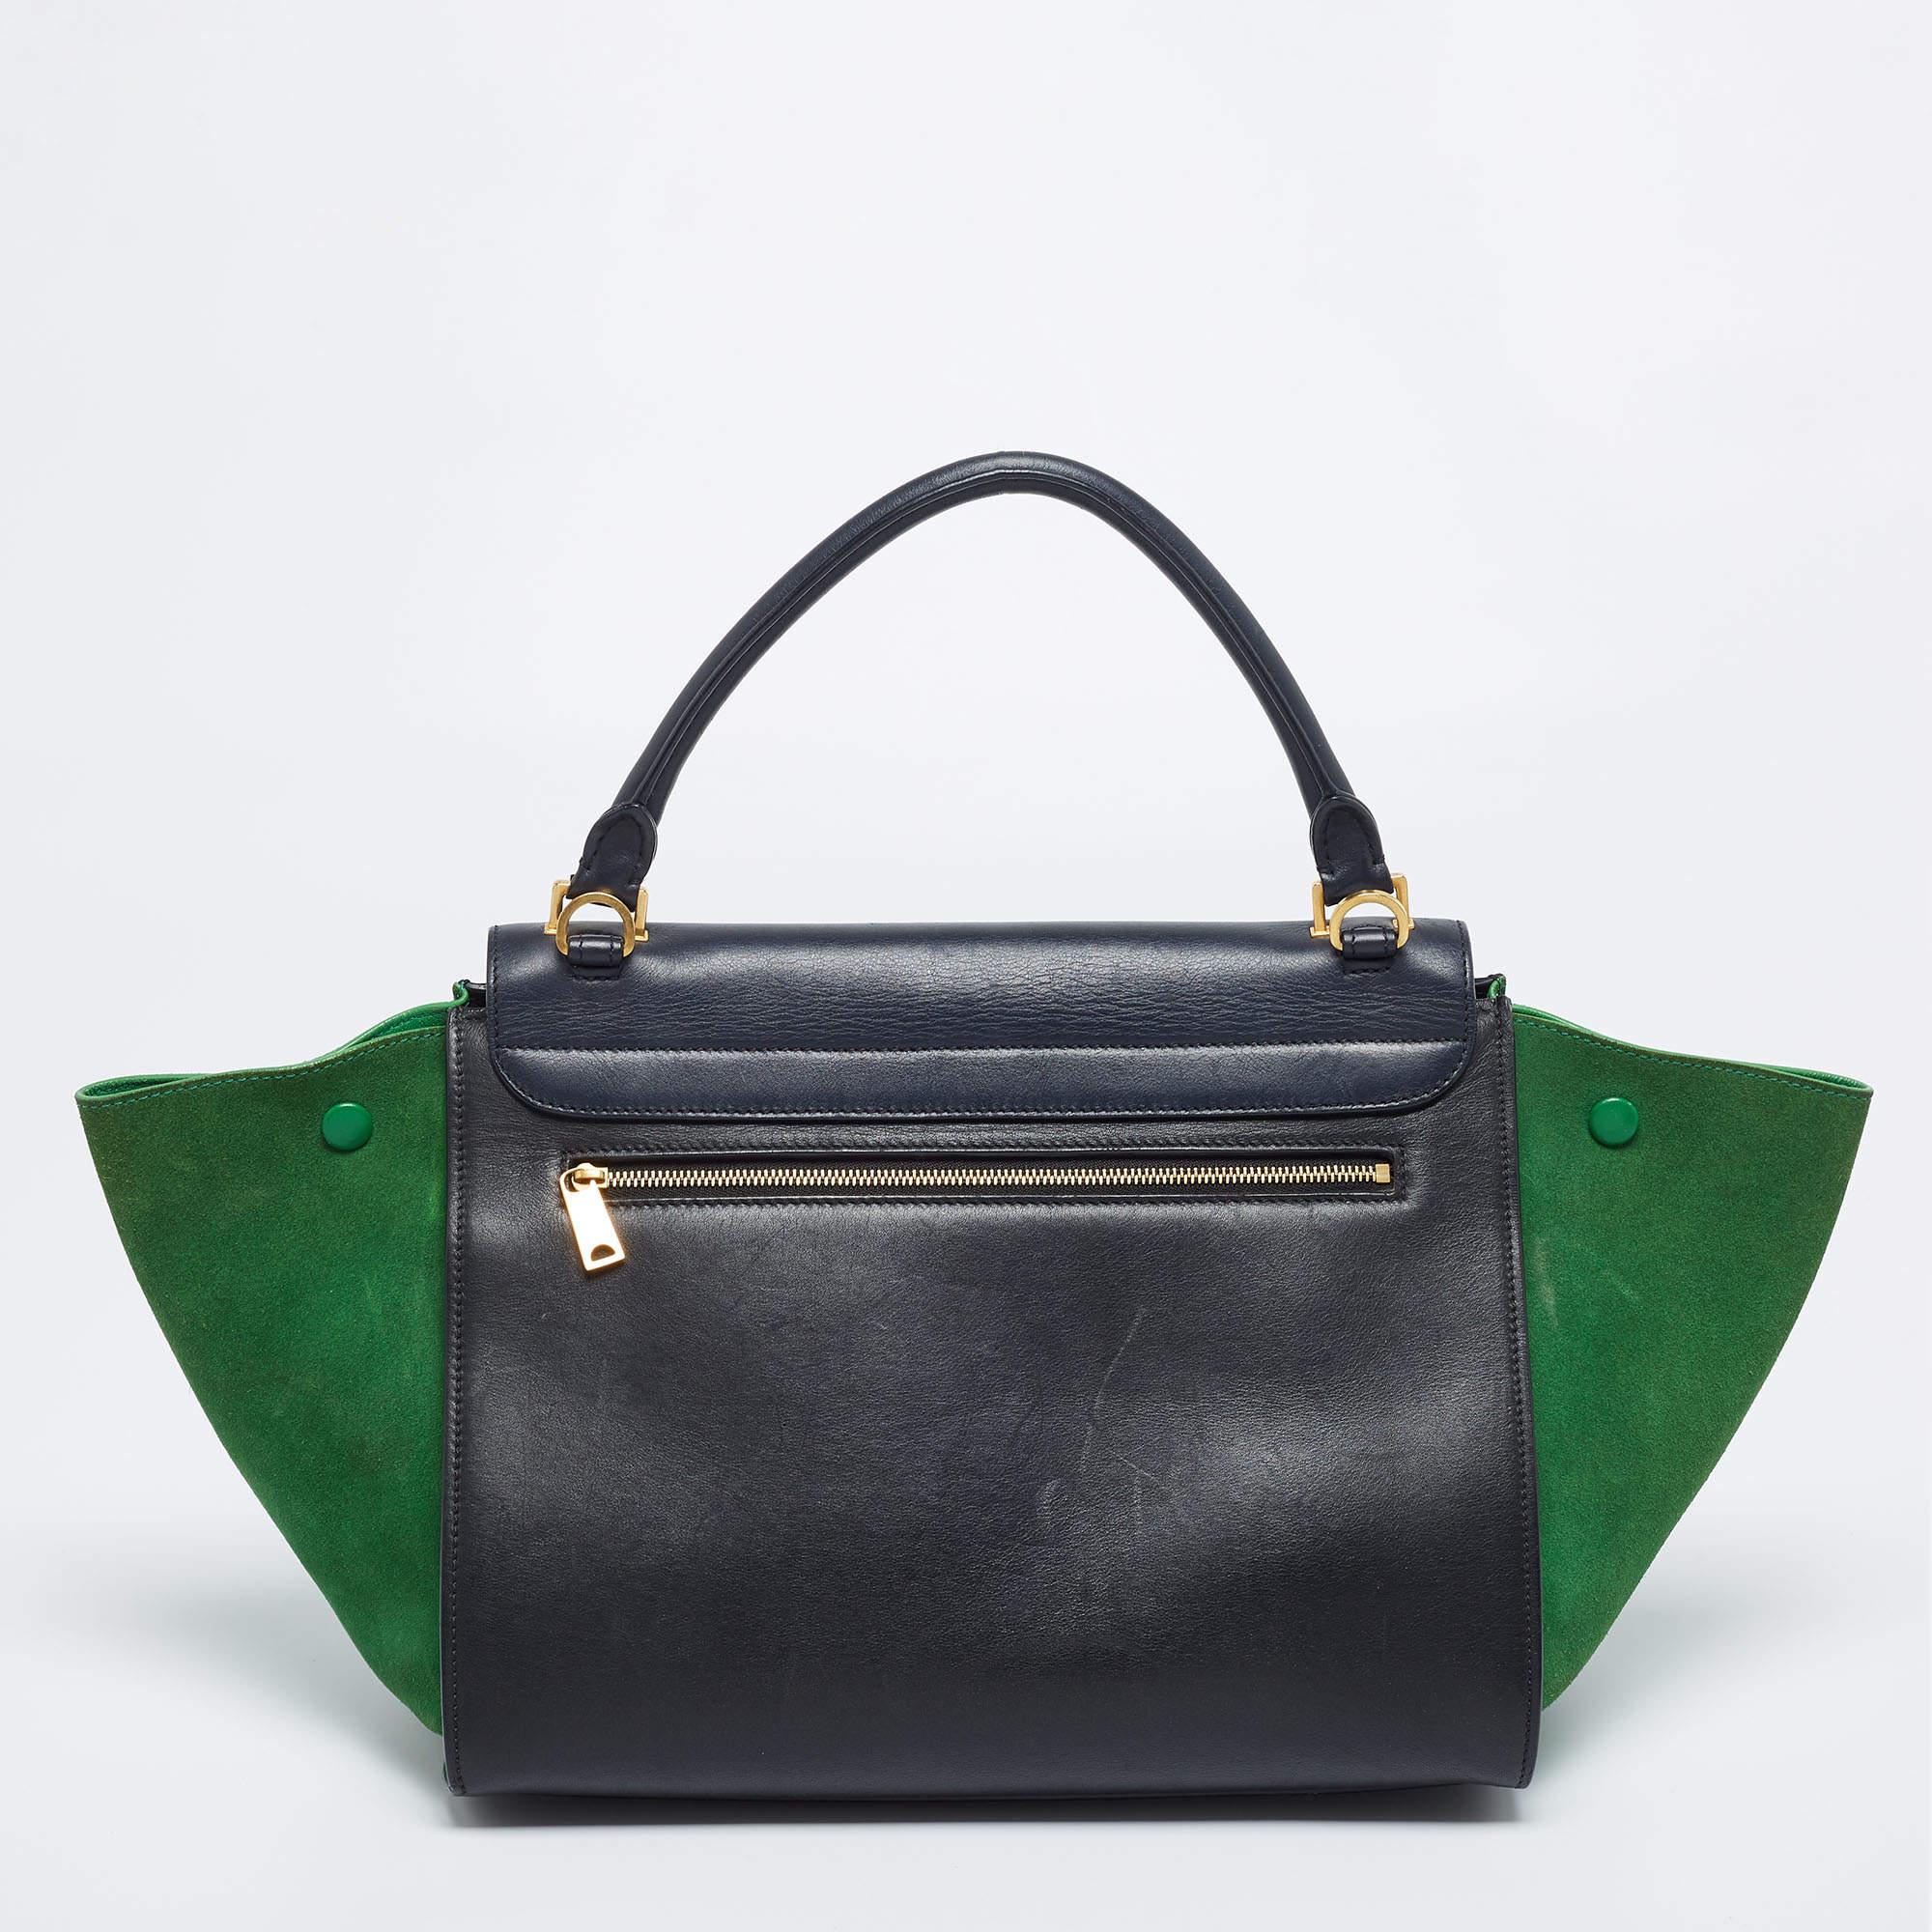 In every stride, swing, and twirl, this beautiful Celine bag will stand out. Crafted from leather and suede in Italy, the bag is designed with signature flappy wings and a flap that reveals a spacious leather interior. A top handle and a bag strap